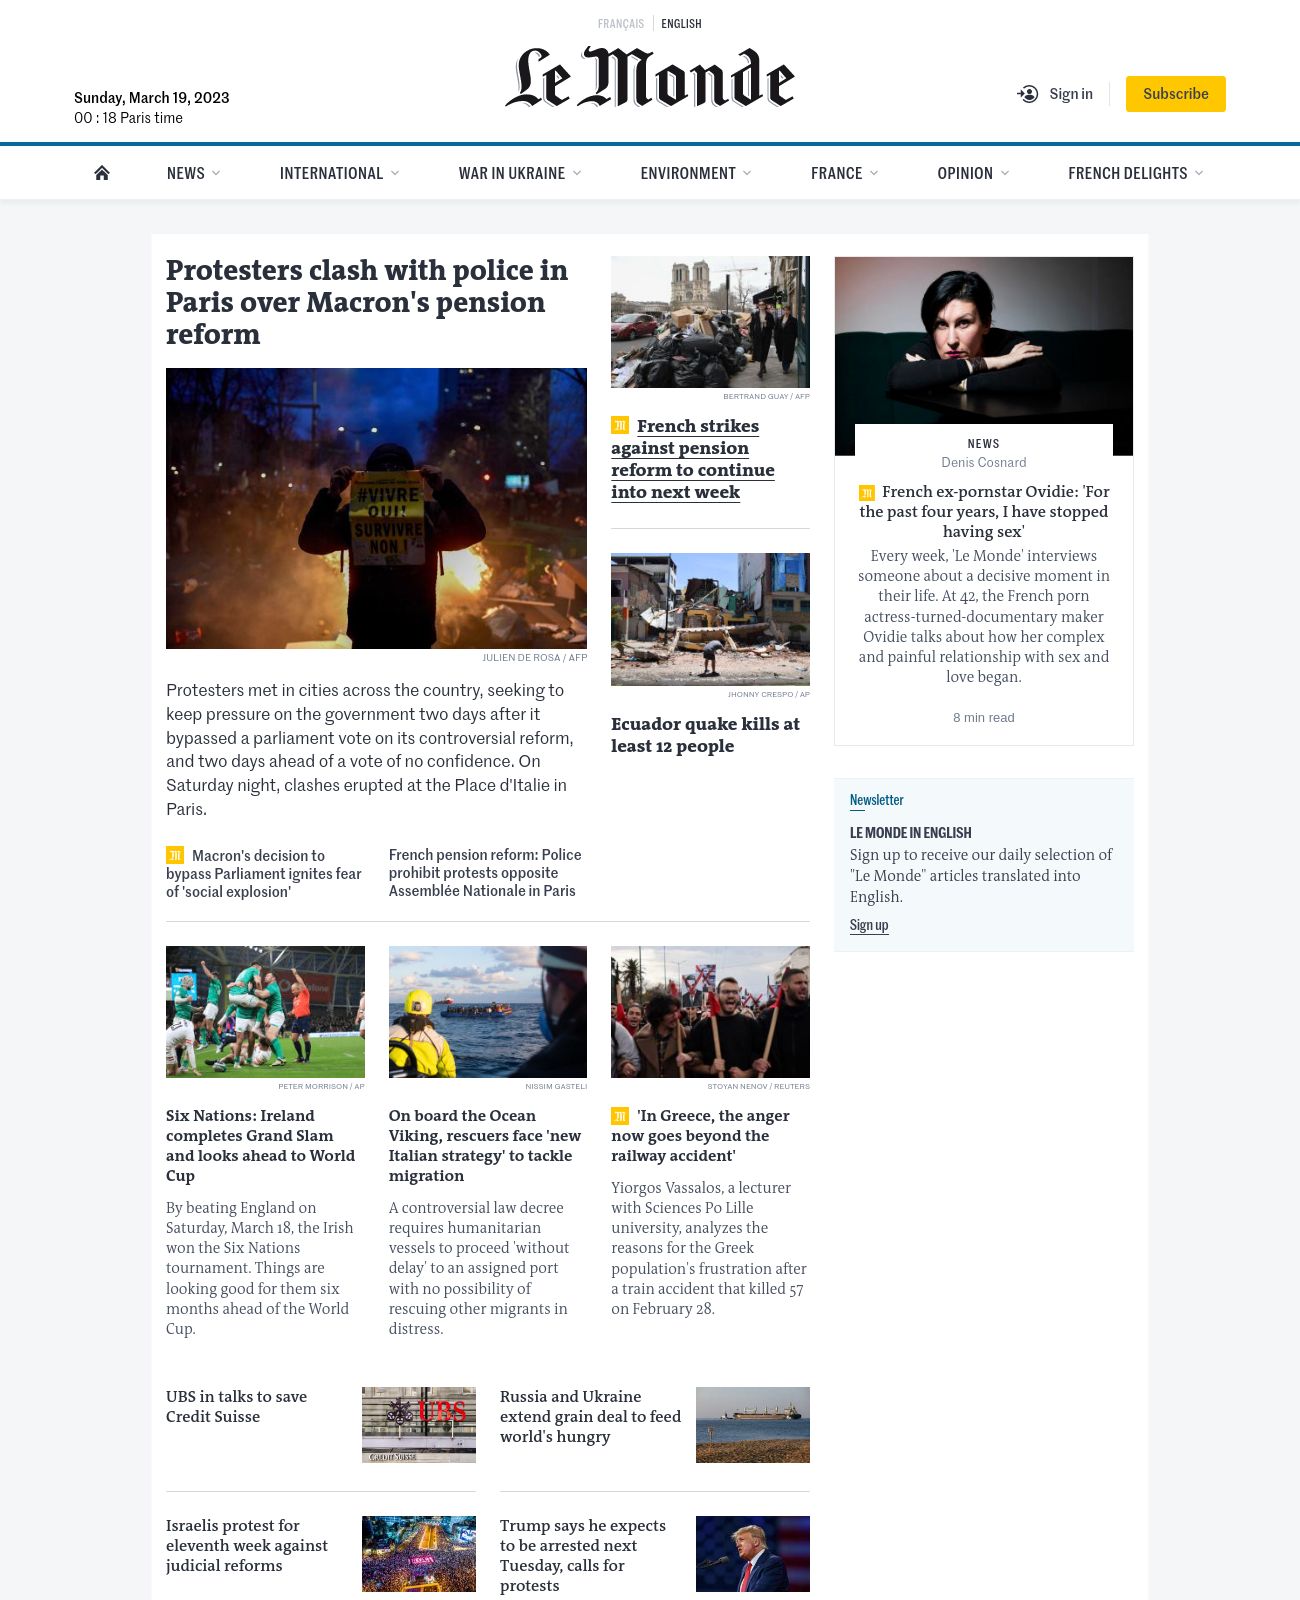 Le Monde in English at 2023-03-19 00:23:19+01:00 local time